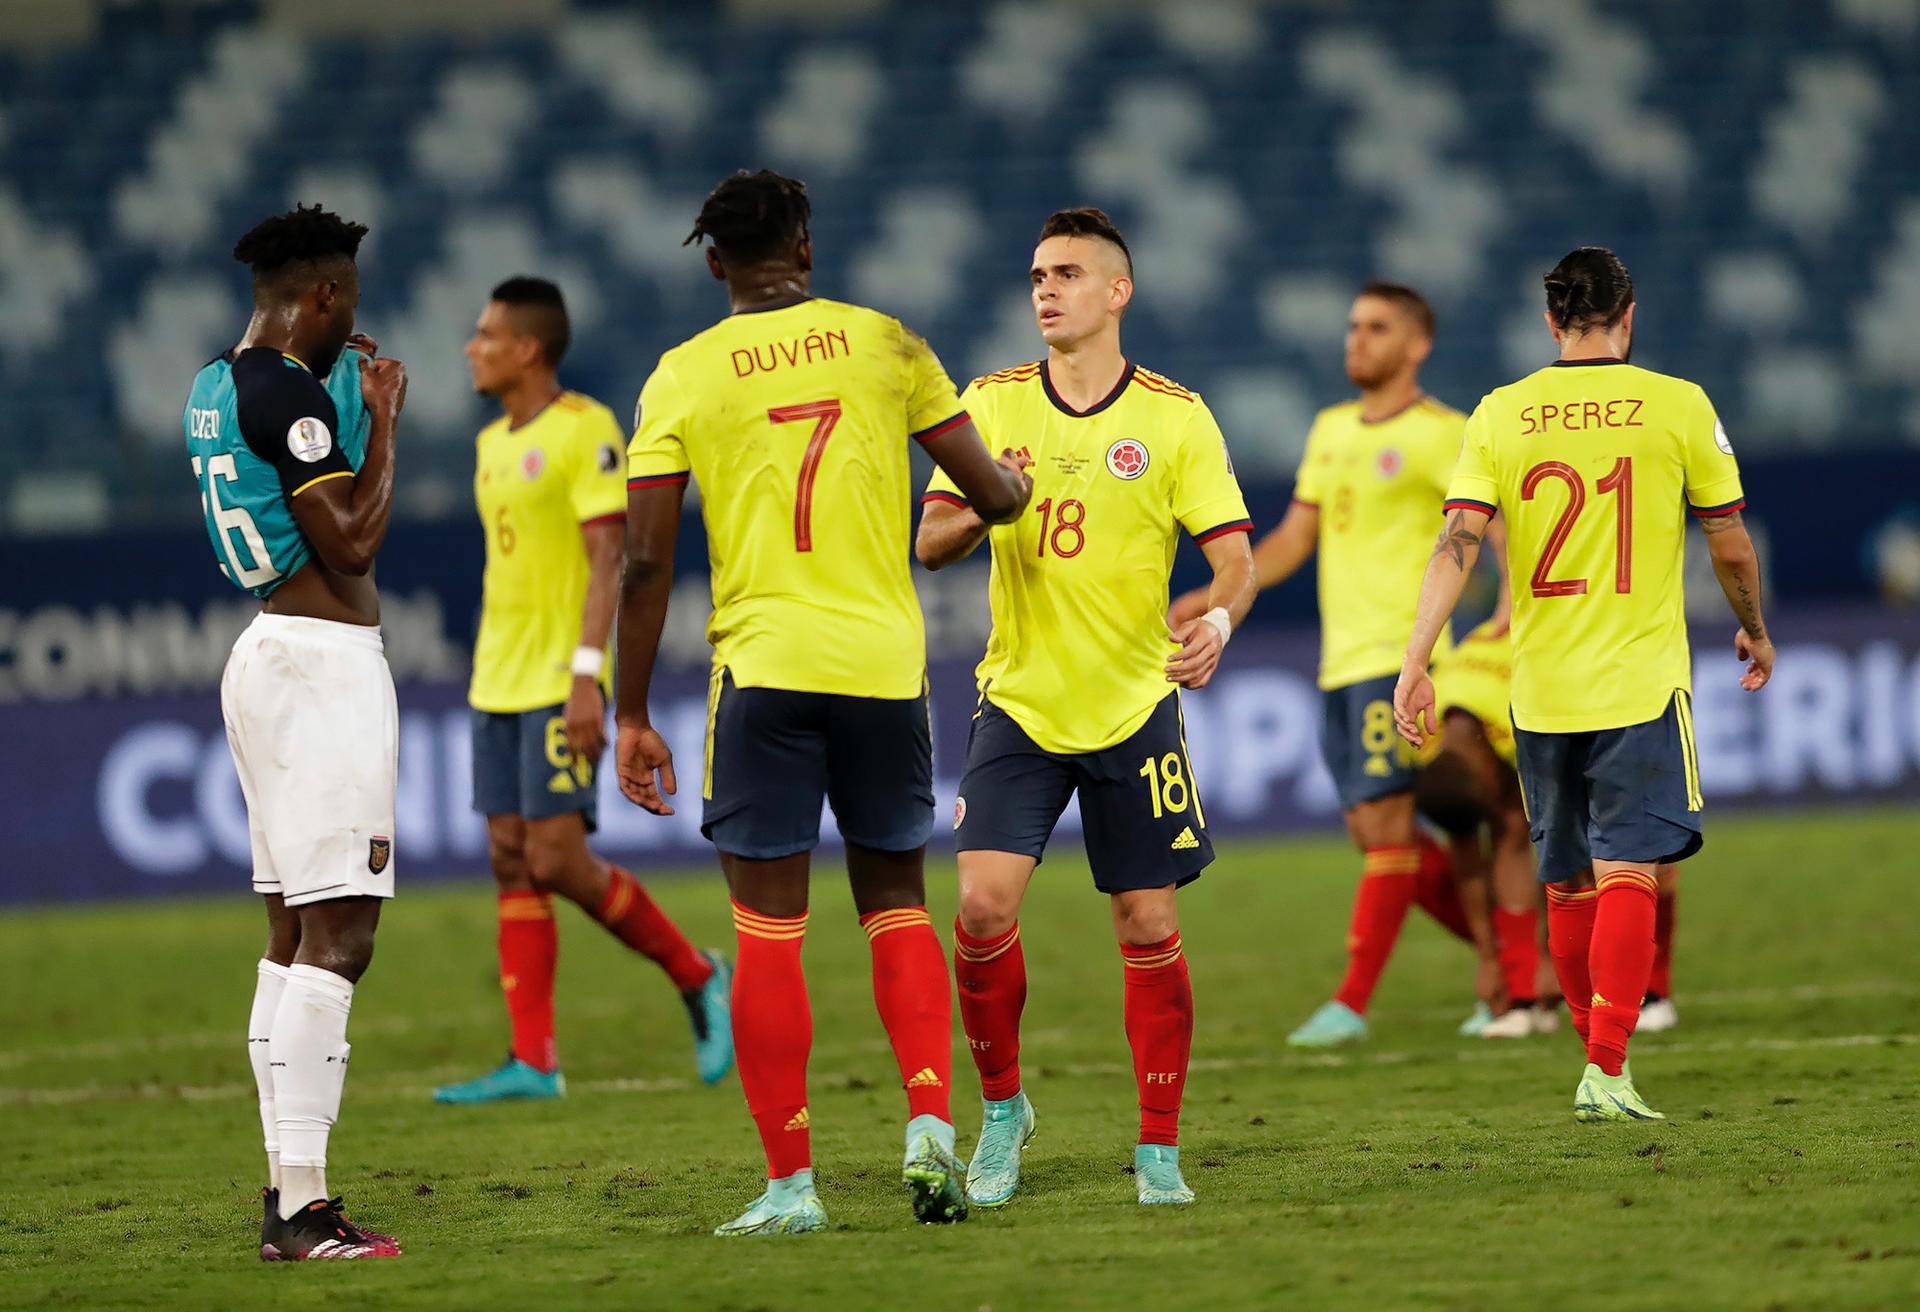 Colombia's players celebrate winning 1-0 against Ecuador during a Copa America soccer match at Arena Pantanal stadium in Cuiaba, Brazil, June 13, 2021.